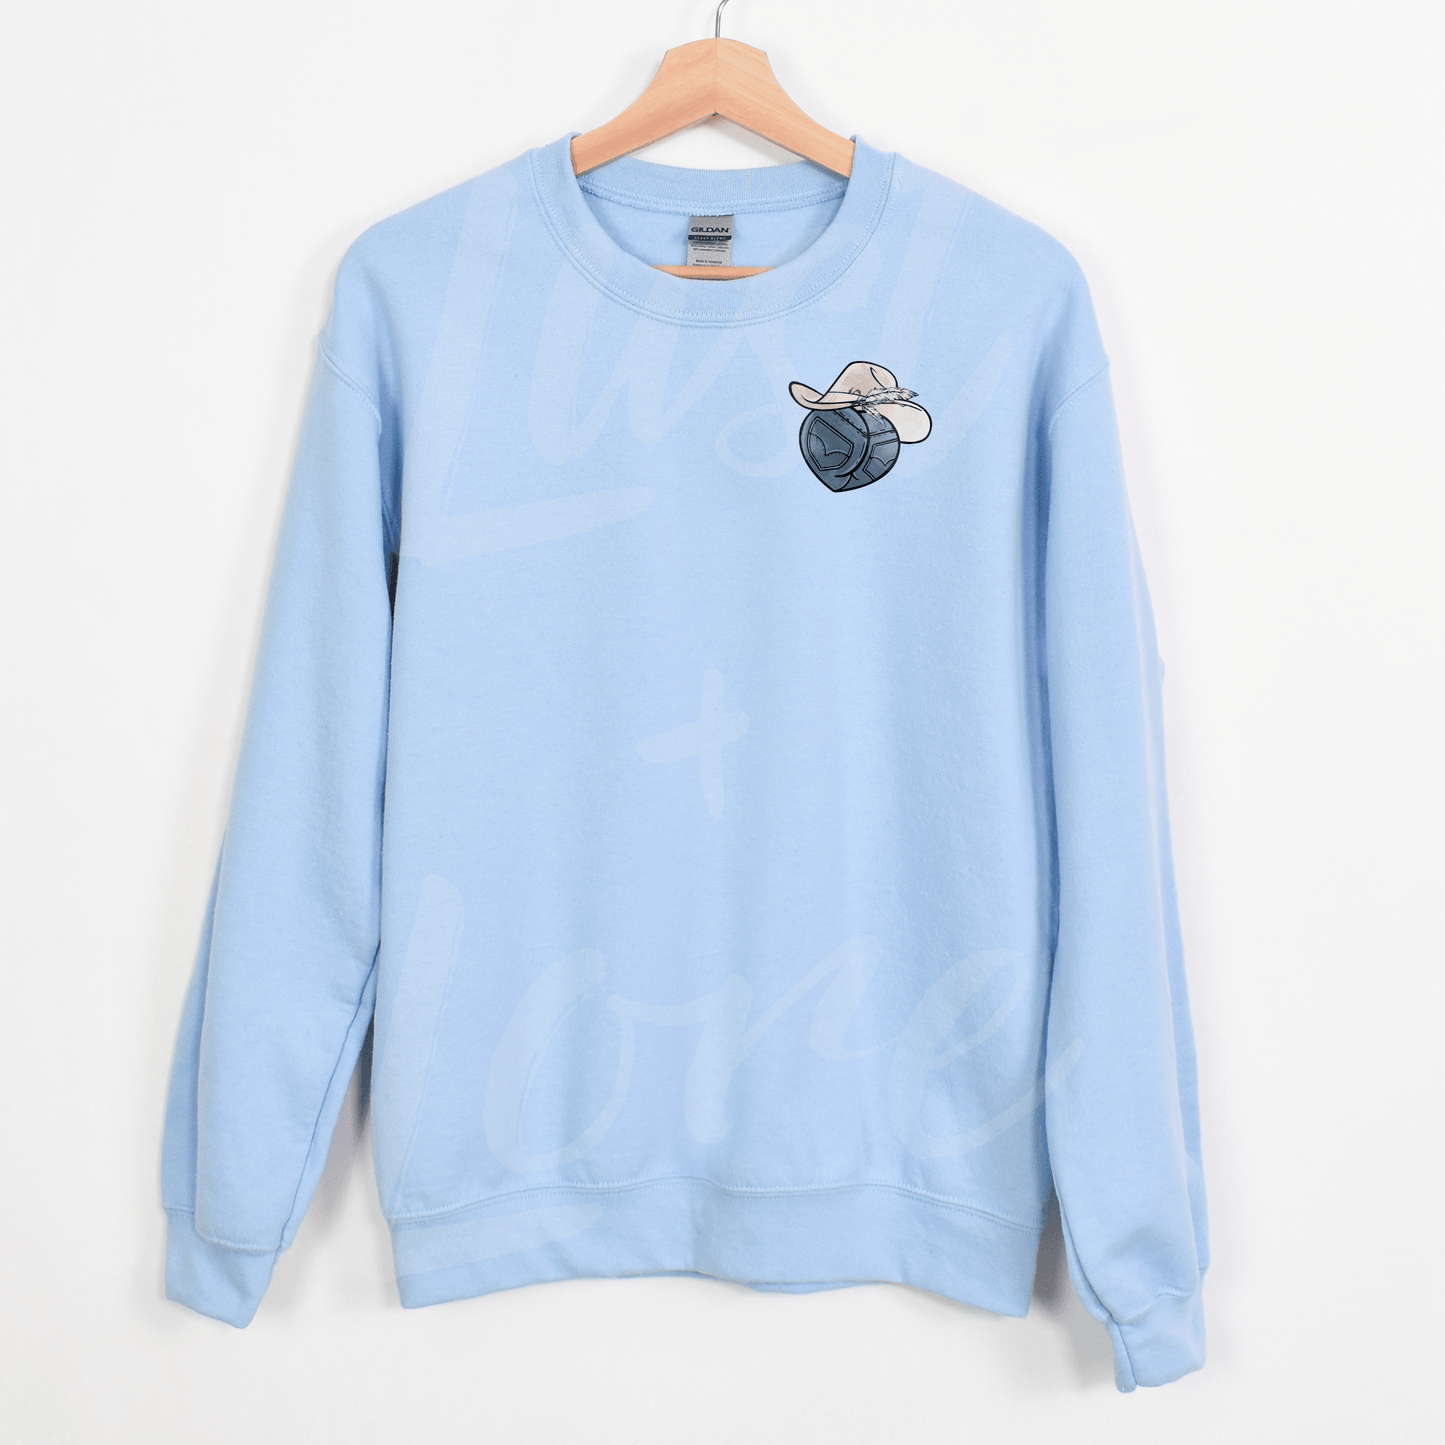 Baby's Got Her Blue Jeans On // CREWNECK